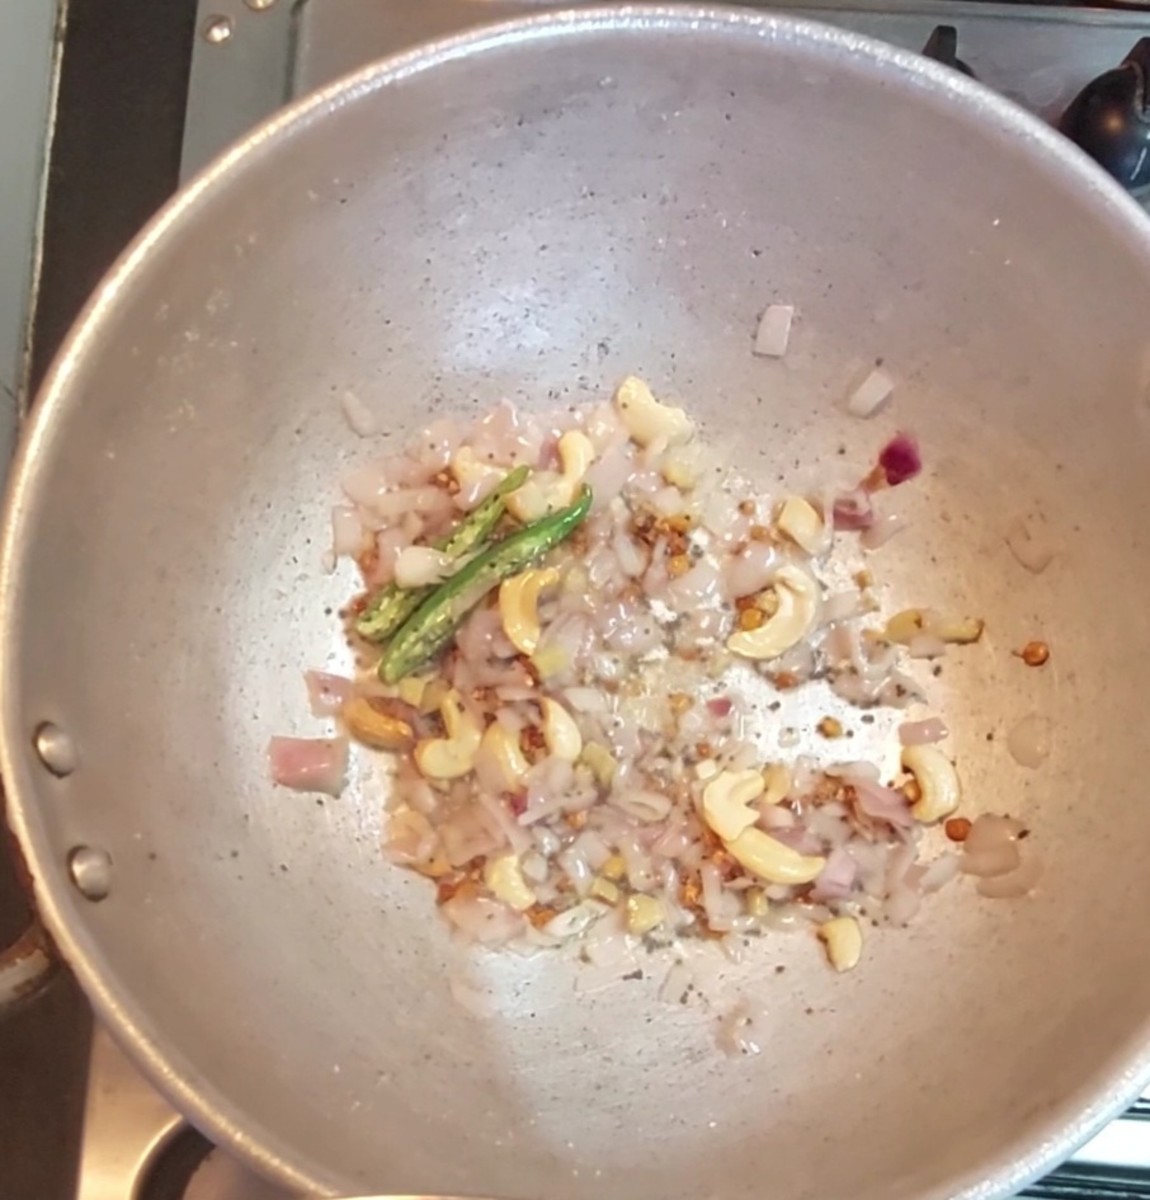 Add 1 chopped onion, 1 teaspoon ginger and 1-2 green chilies. Saute till onions turn translucent.